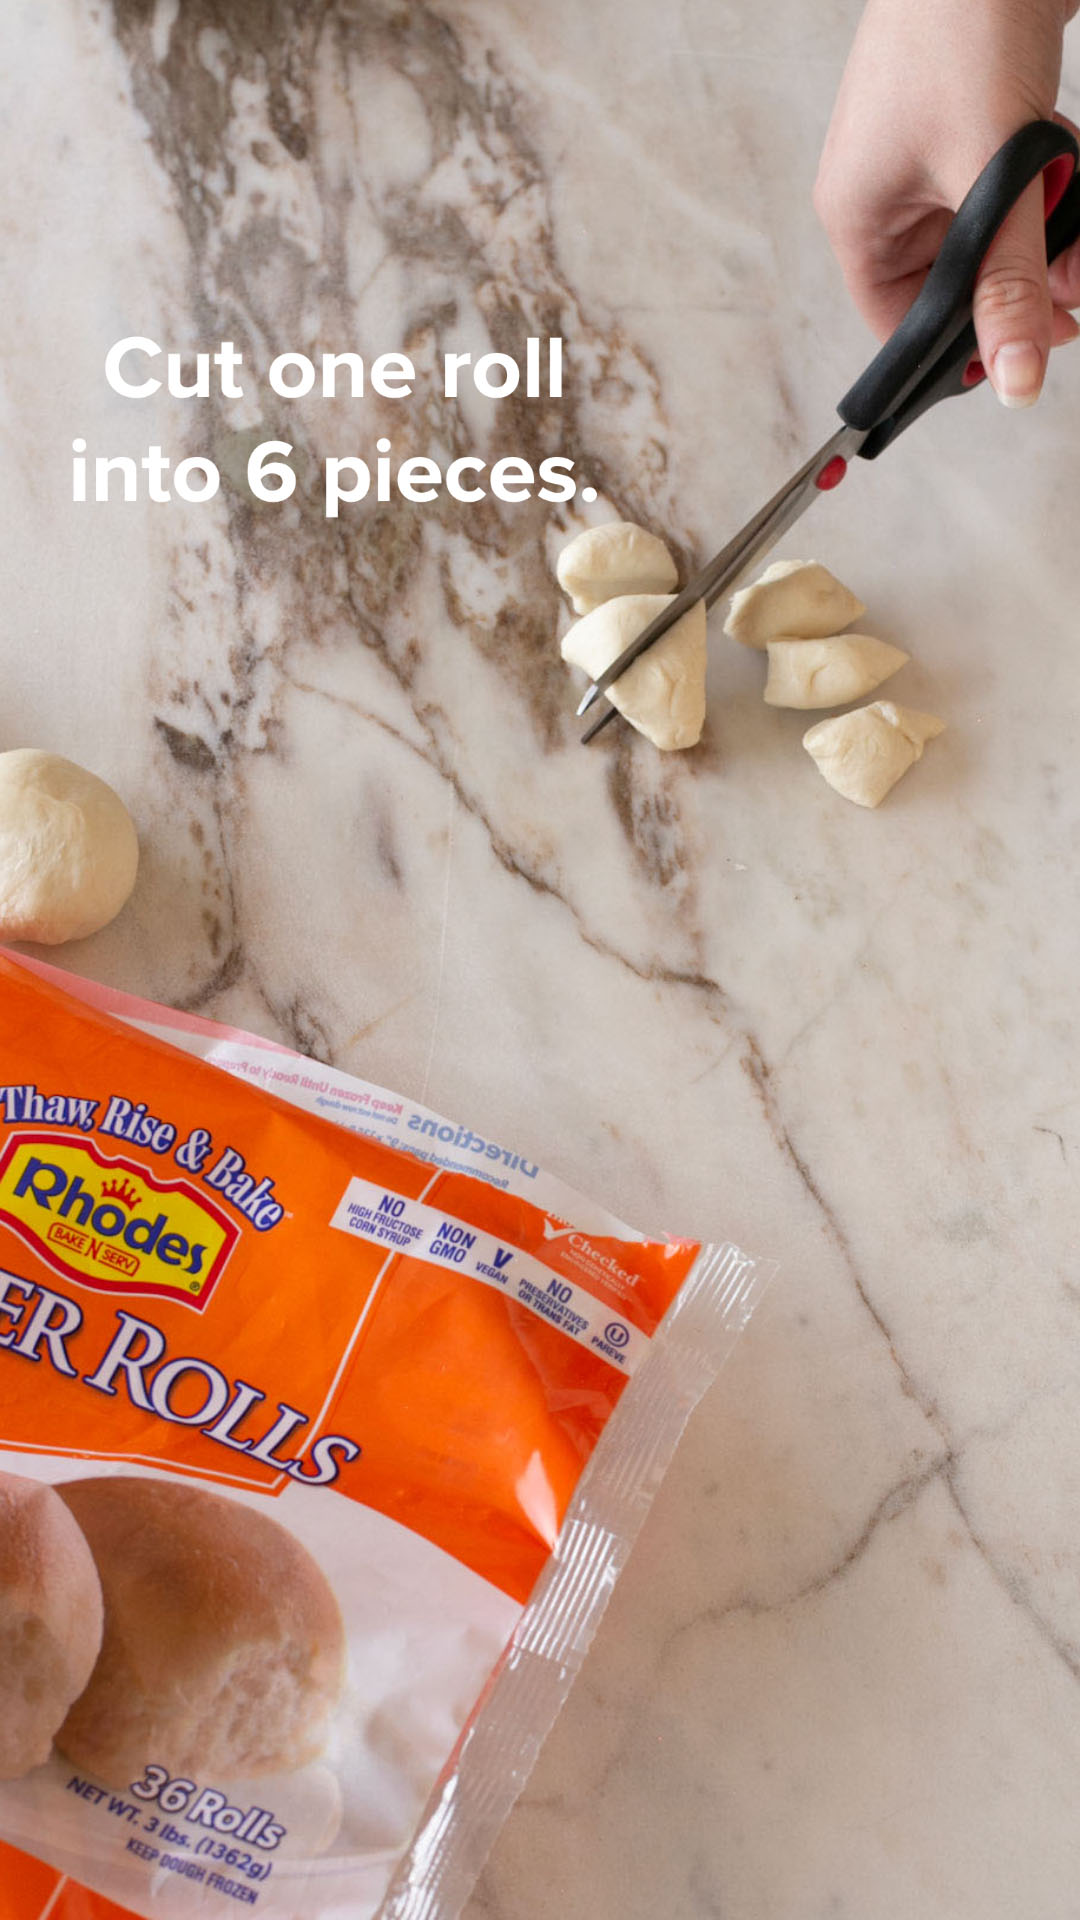 Cut one roll into 6 pieces.